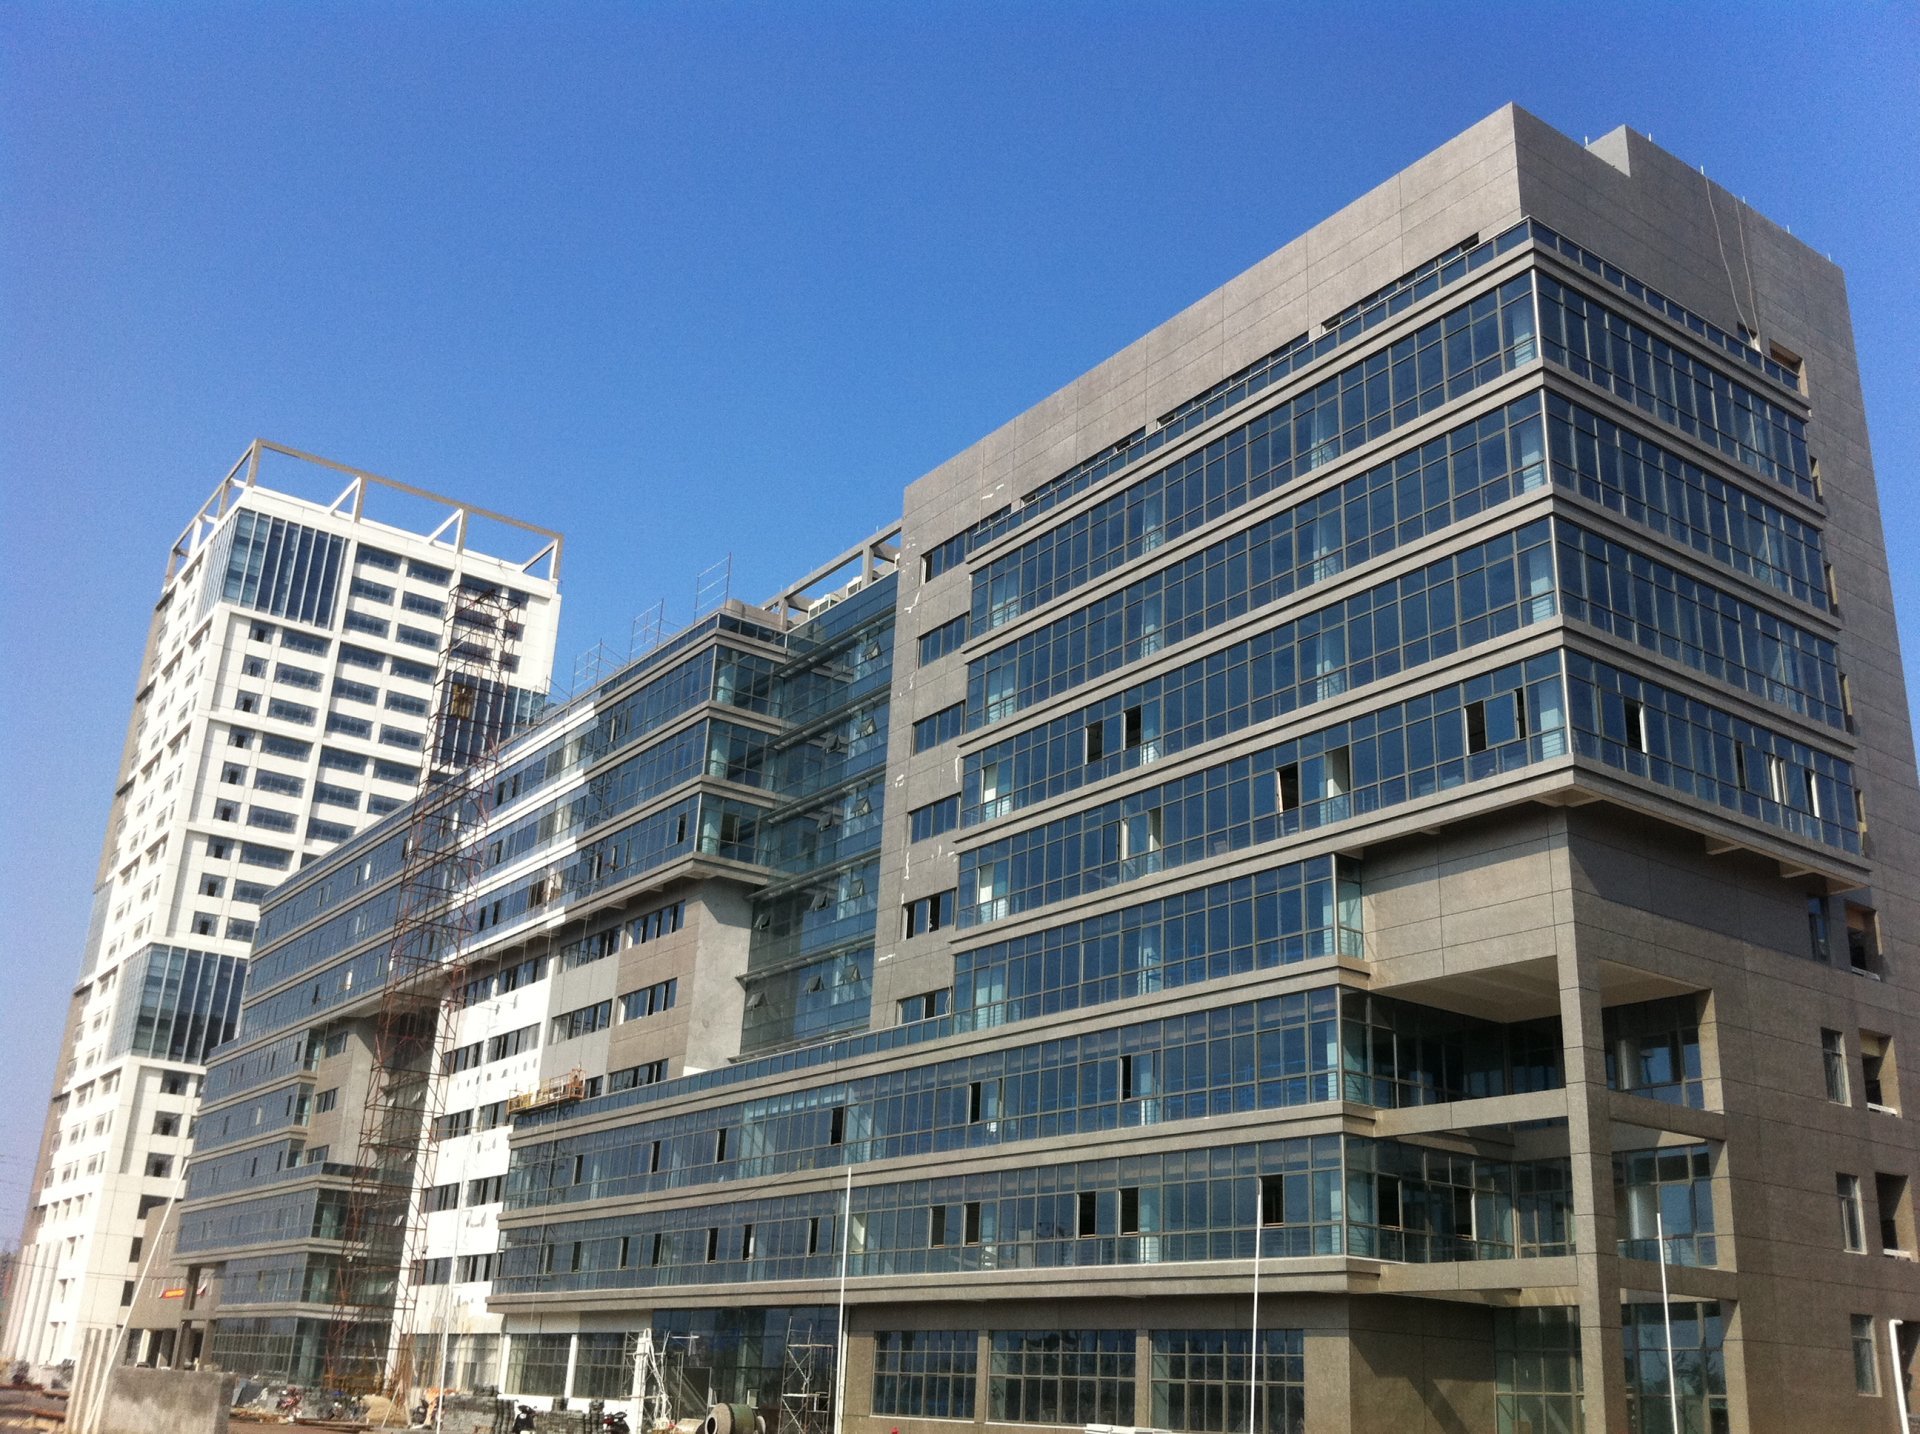 Wenzhou Wenchang Science and Technology Building: 5mm (light blue) LXTB160+9A+5mm white glass; 10000 square meters.